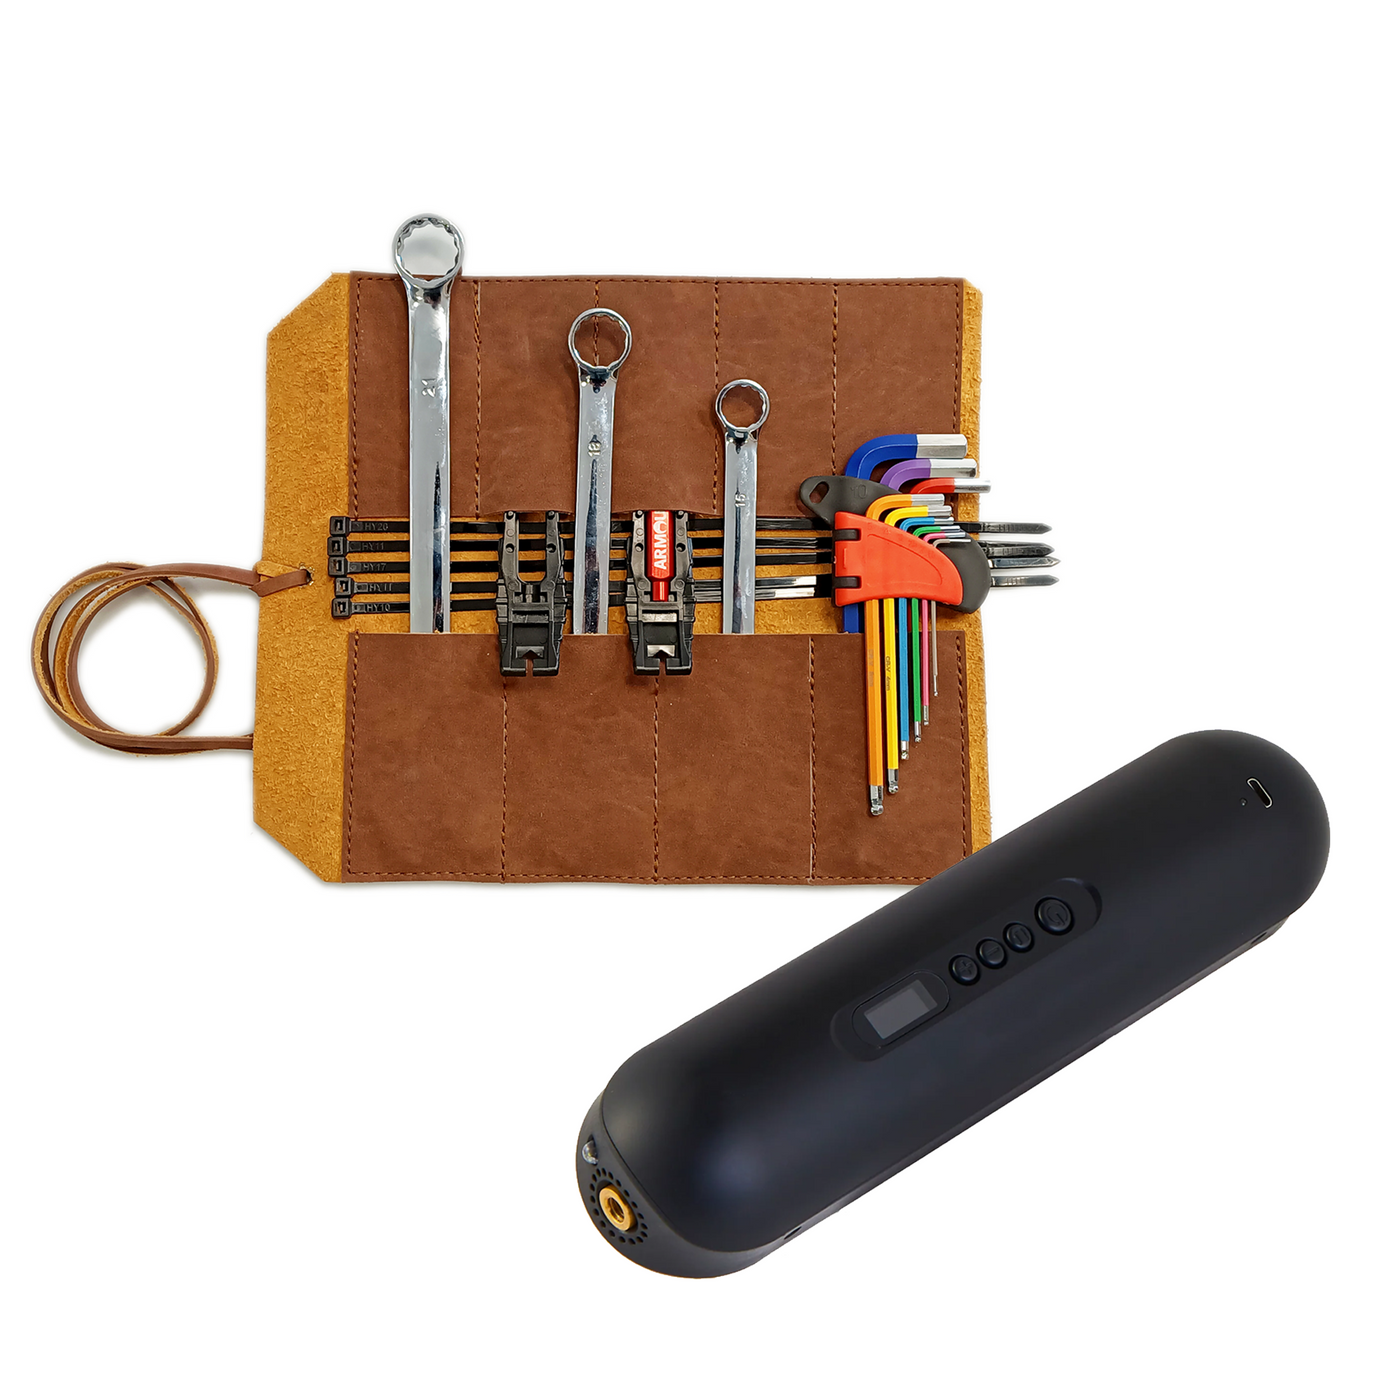 SUPER73 Tube Replacement Tool Kit